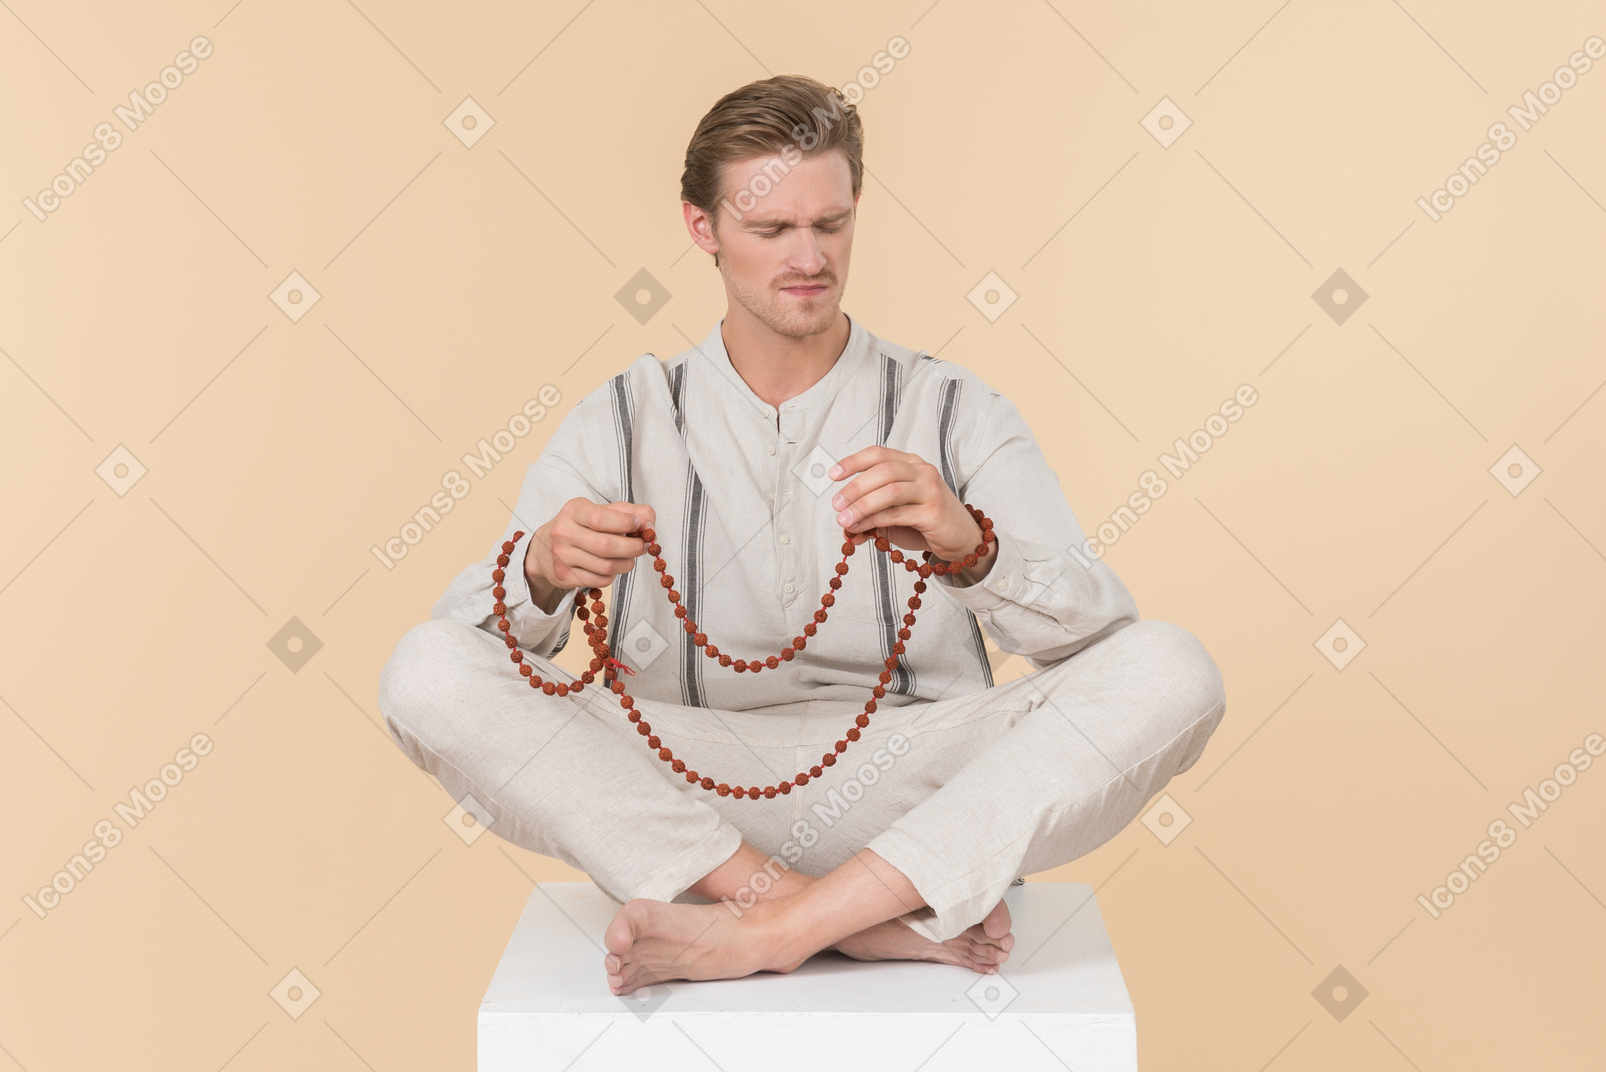 Young caucasian man sitting in lotus pose and putting on necklace